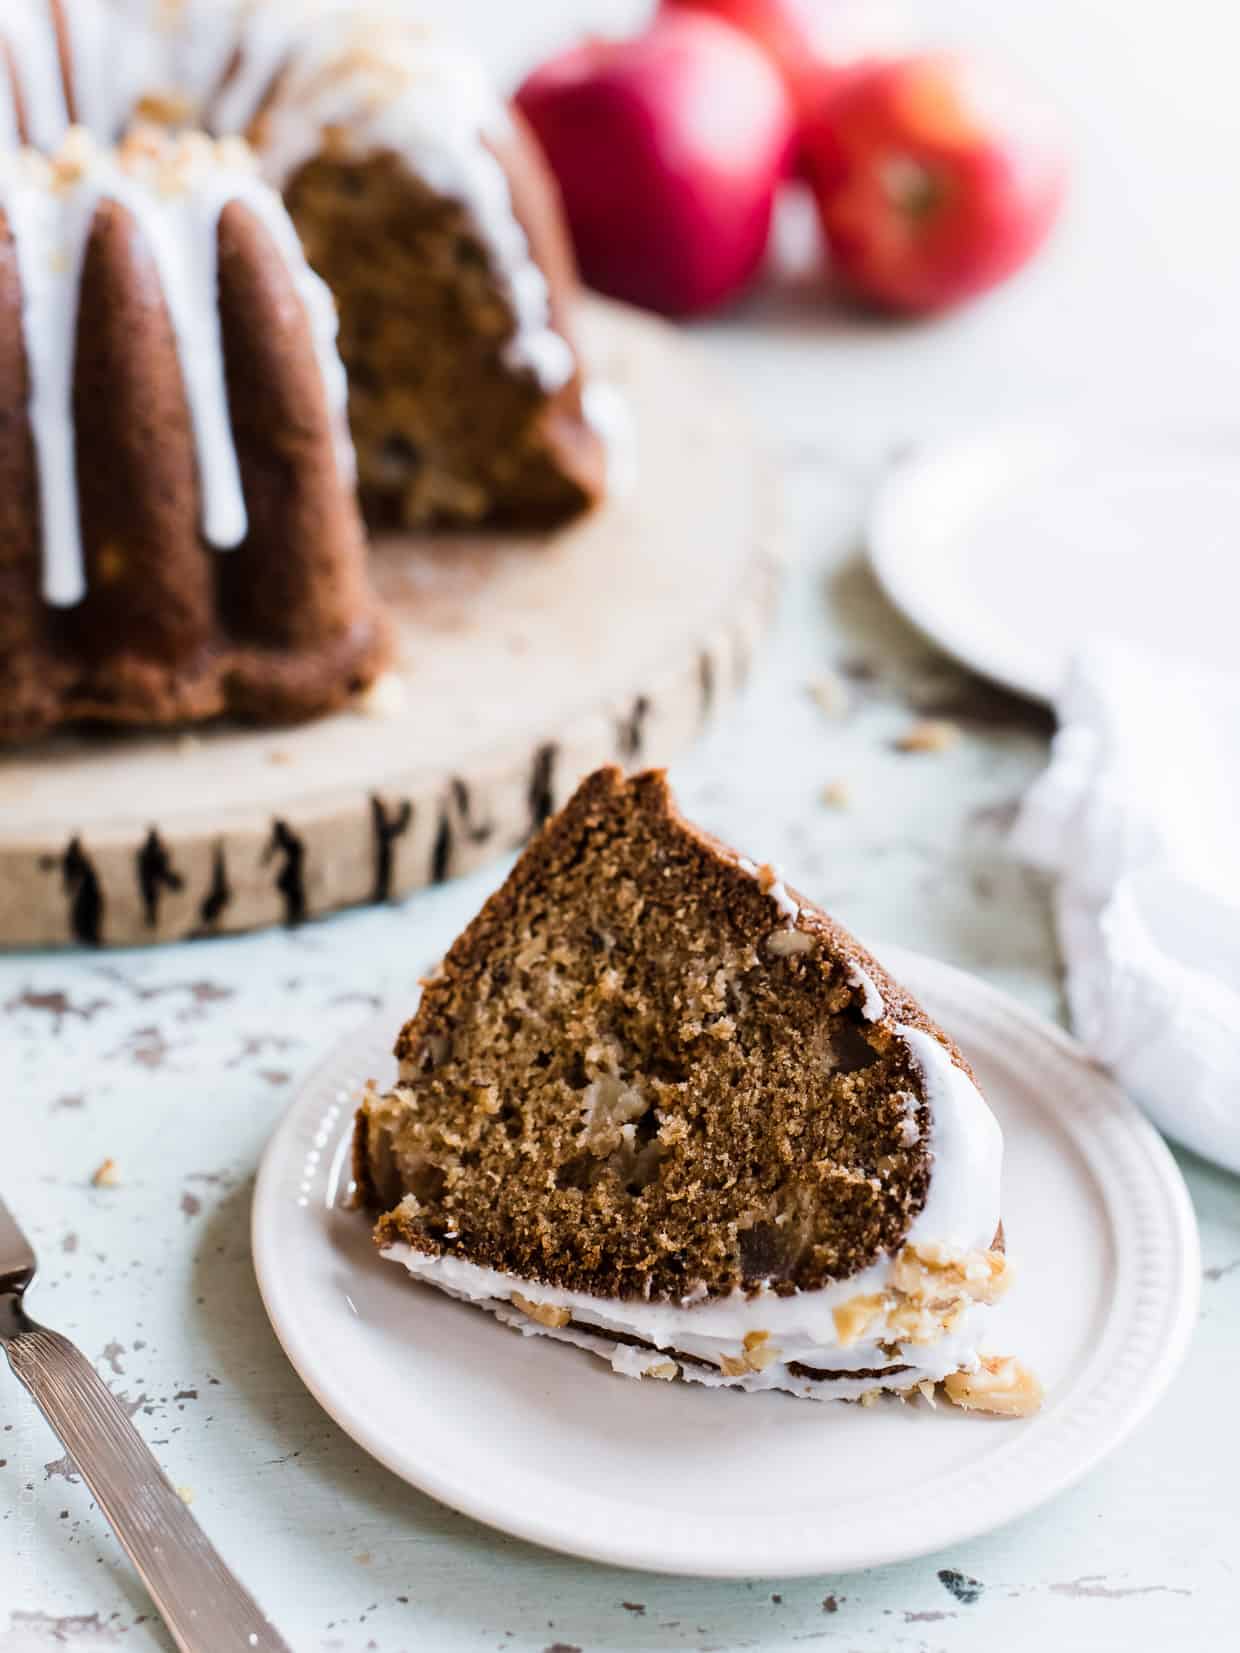 A slice of Apple Walnut Delight Cake with the remaining cake in the background.